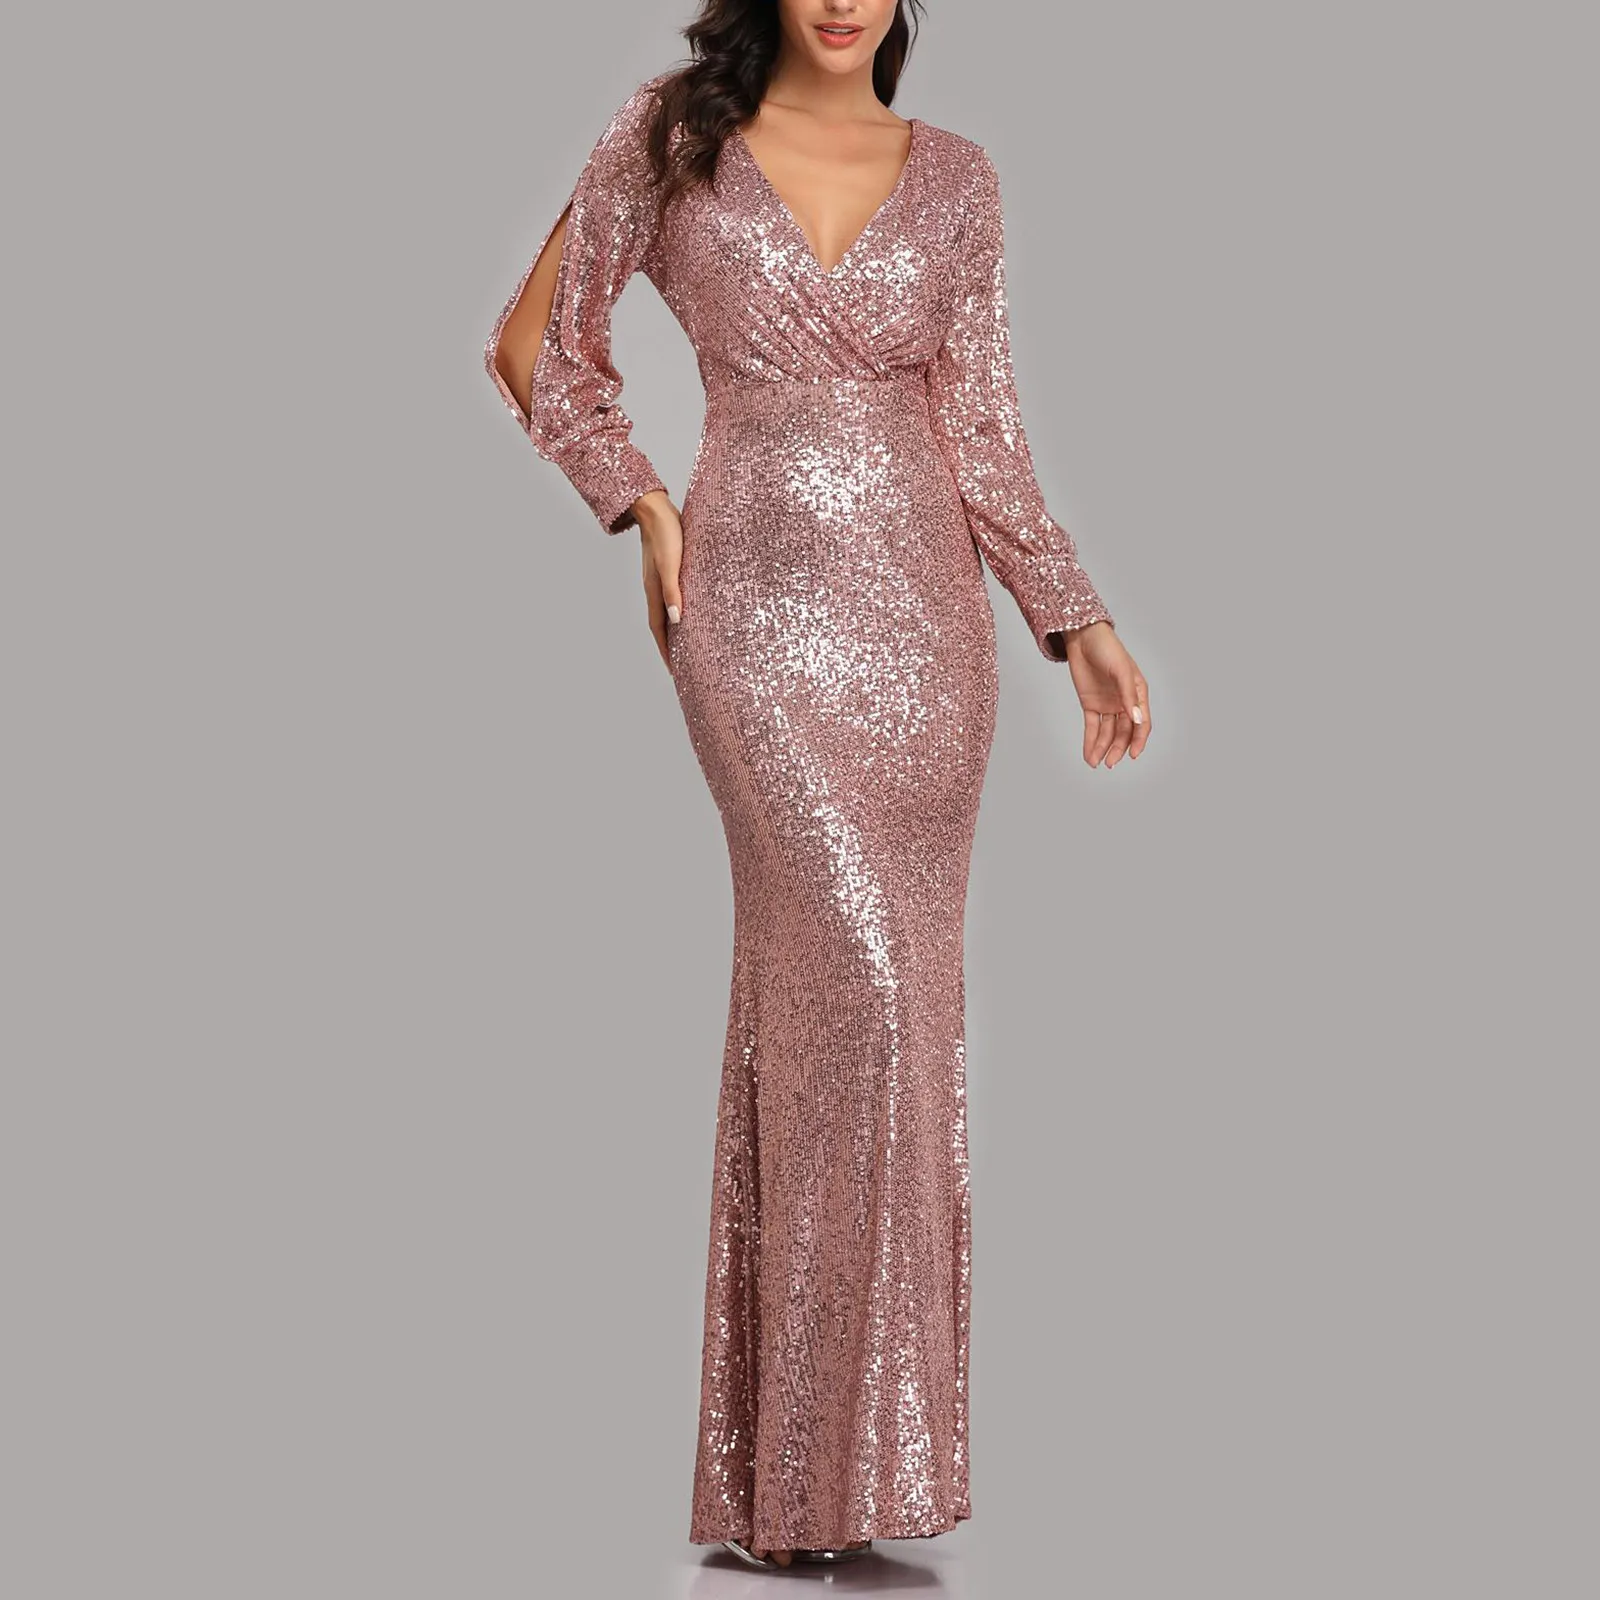 

Long Sleeve Sequin Maxi Dress Floor Length Sparkles Stretch V Neck Dresses Mermaid Formal Evening Night Party Gown Sundress